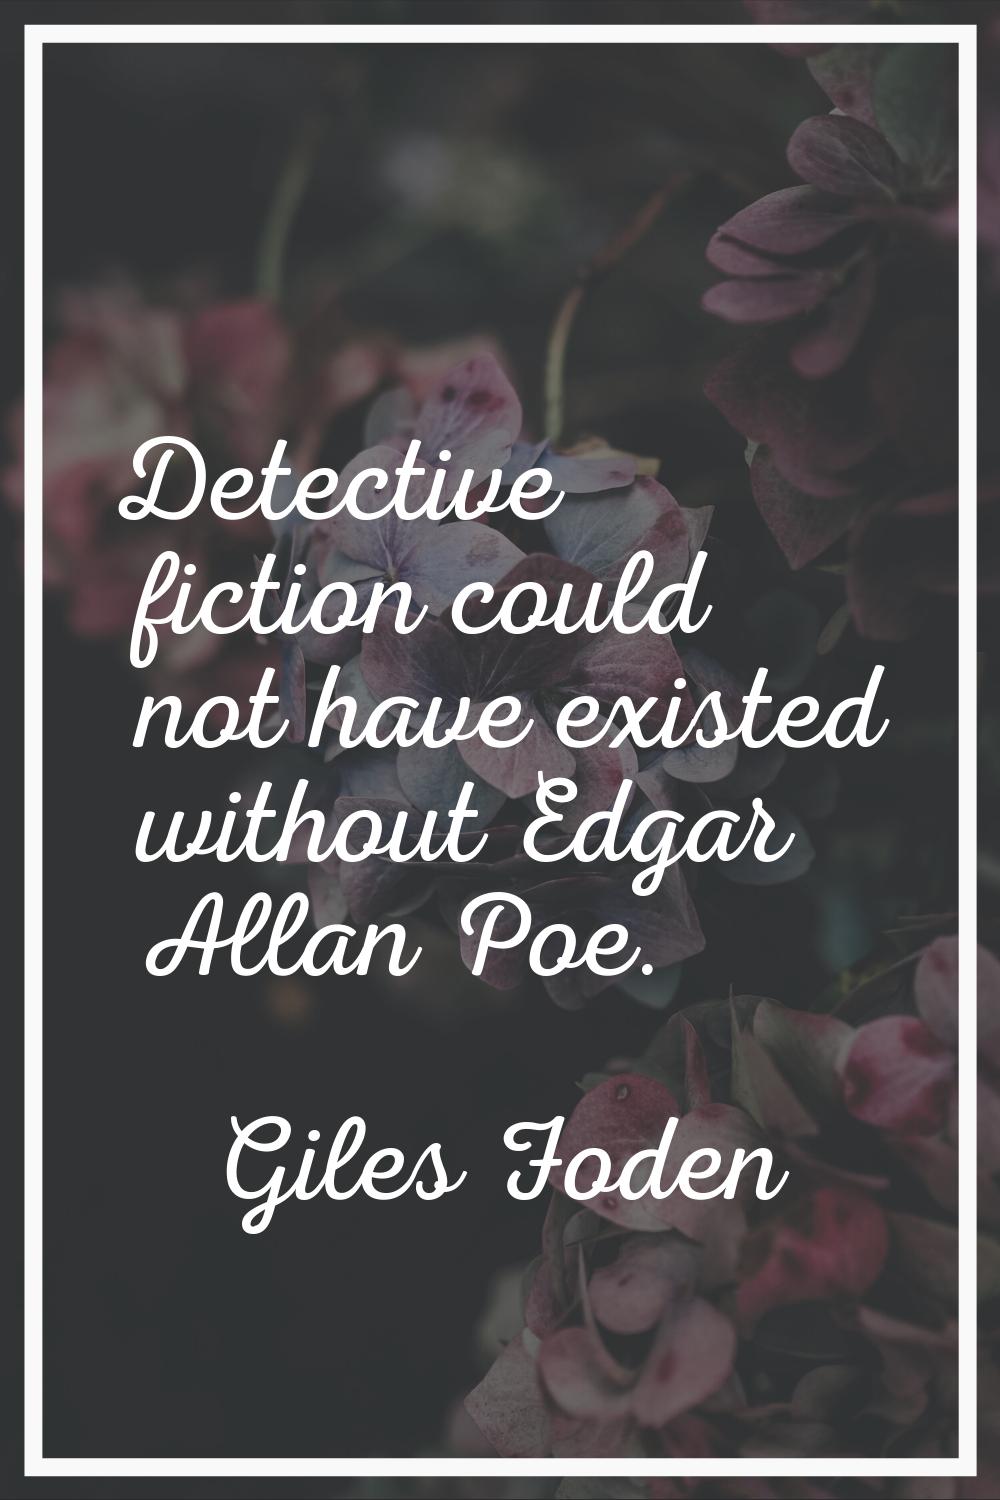 Detective fiction could not have existed without Edgar Allan Poe.